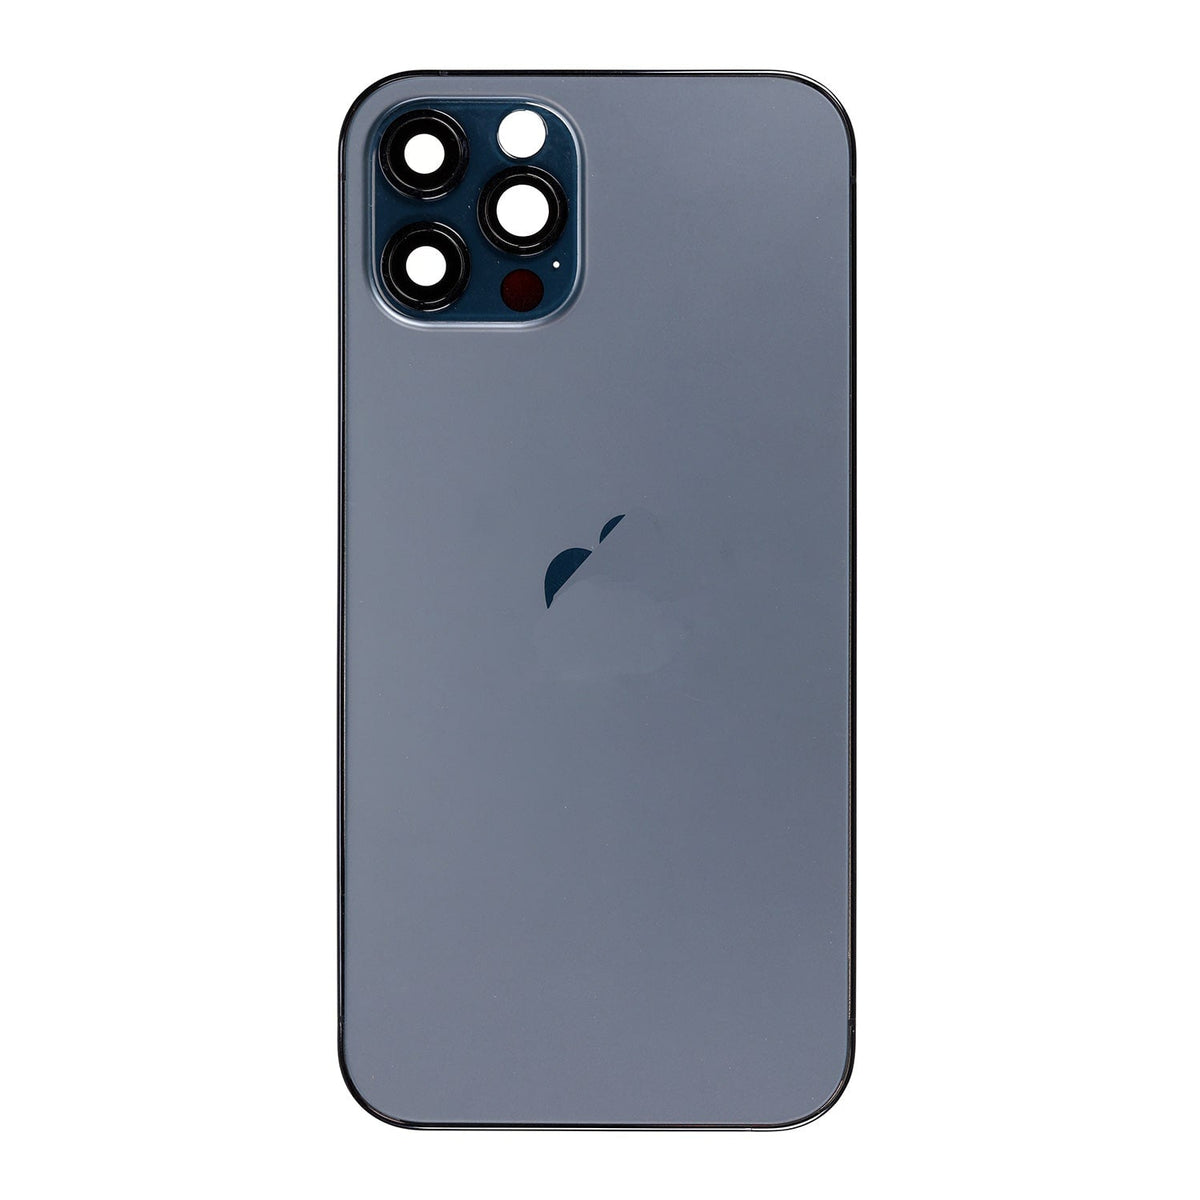 PACIFIC BLUE REAR HOUSING WITH FRAME  FOR IPHONE 12 PRO